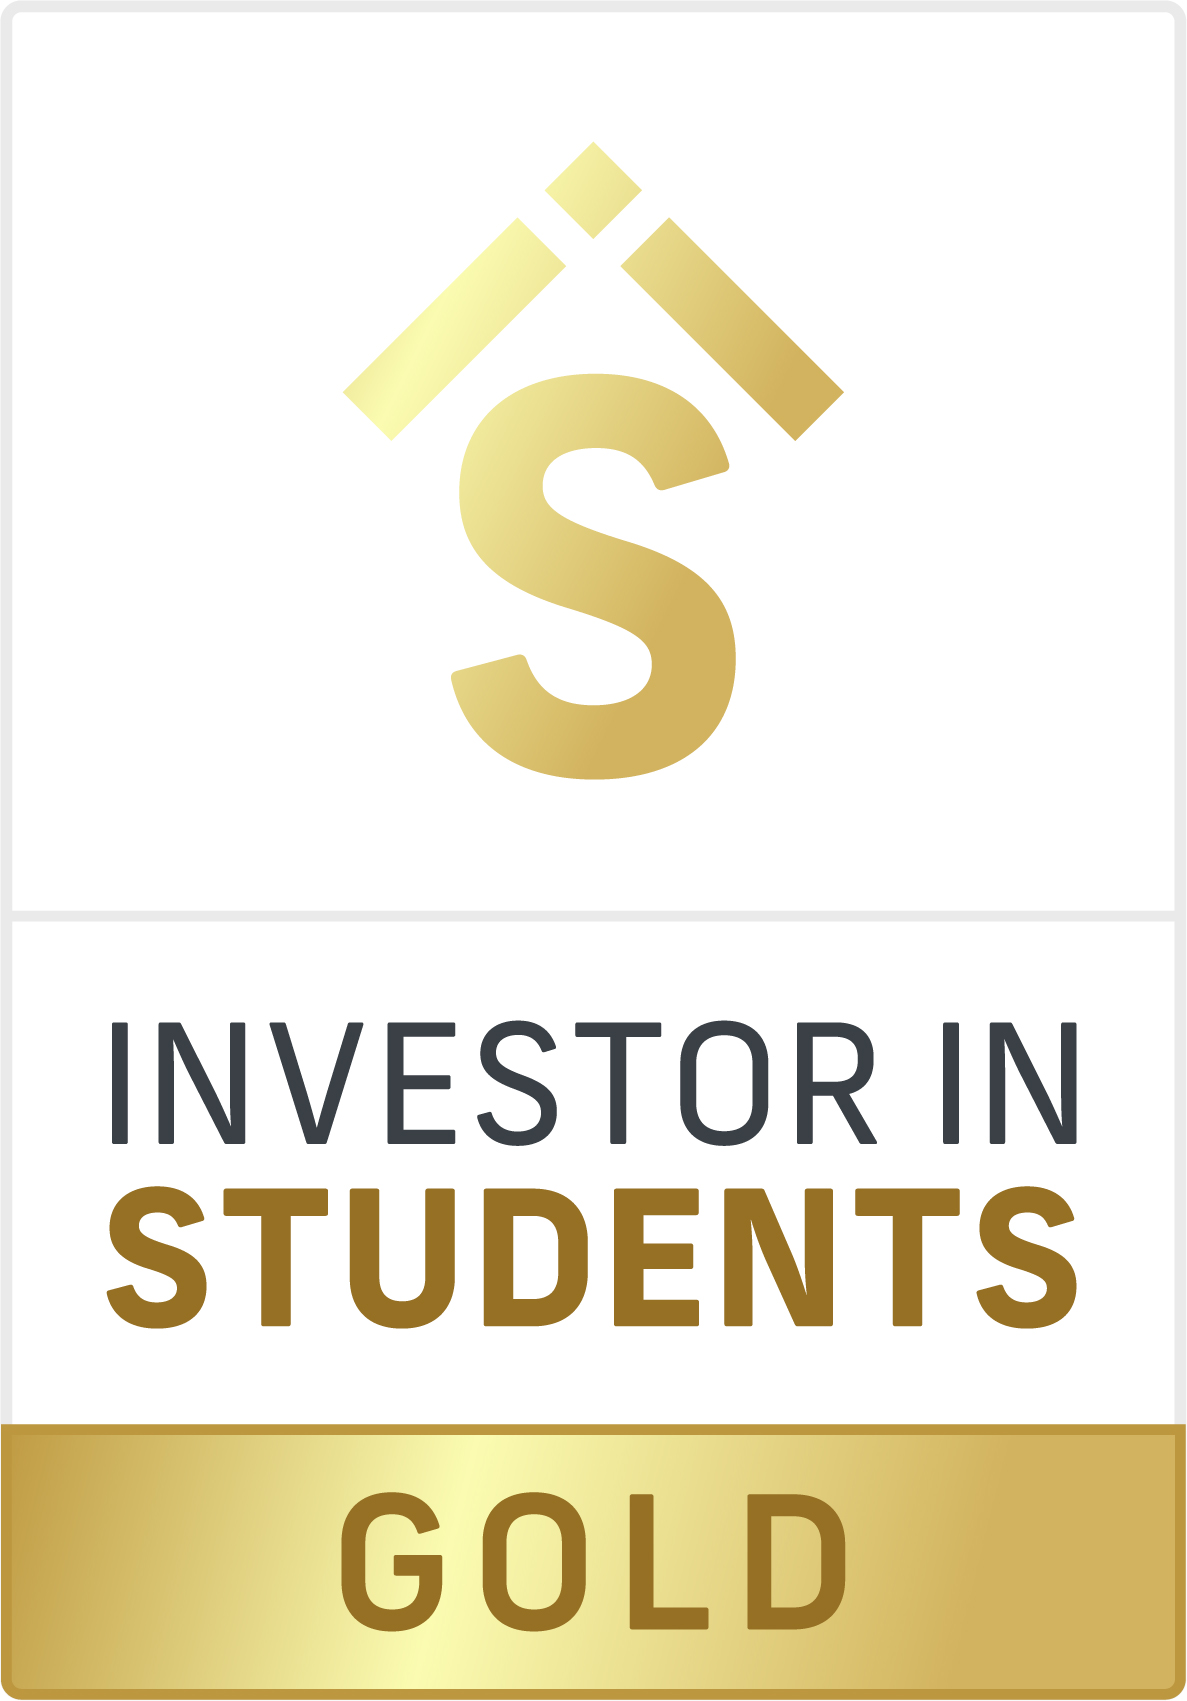 Investor in Students - Gold Accreditation